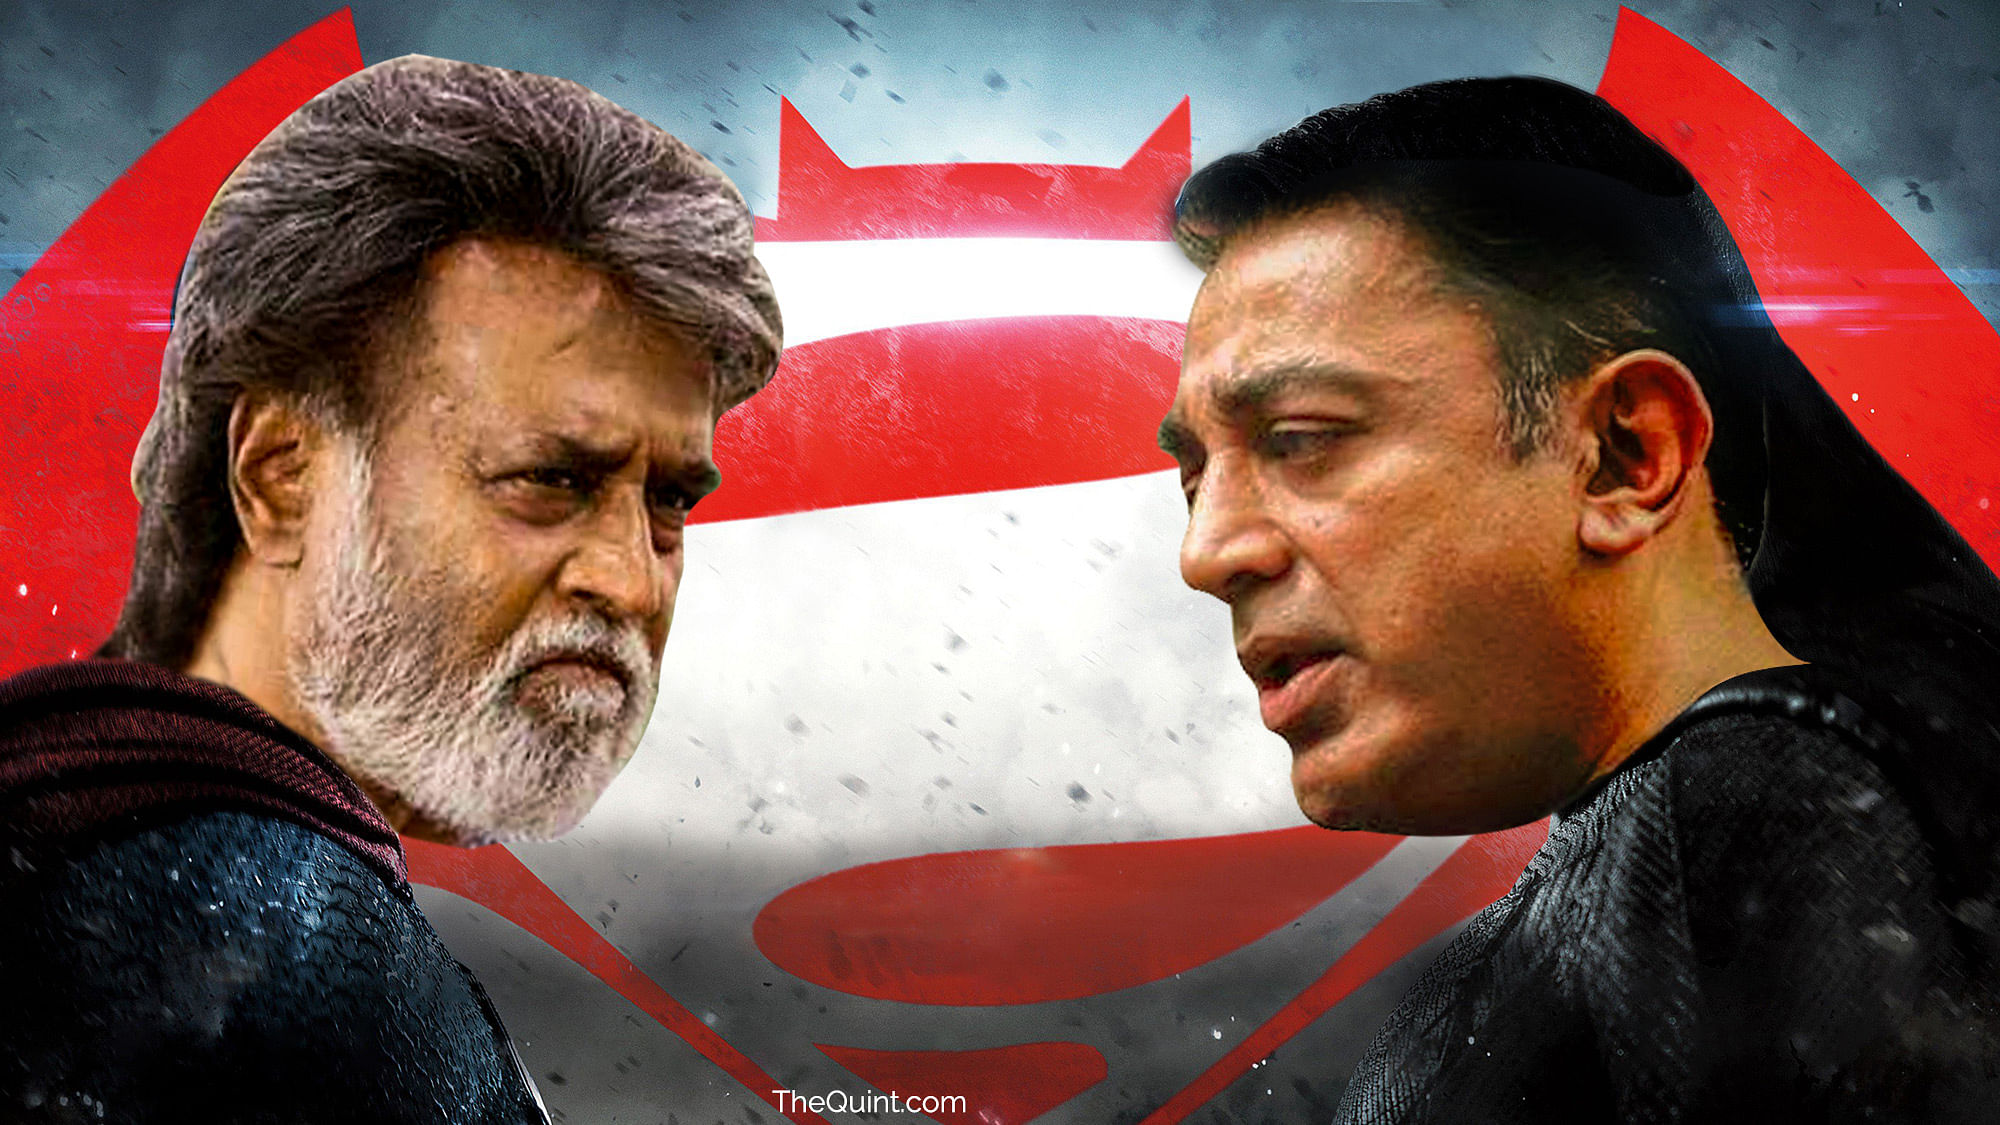 Rajinikanth and Kamal Haasan have been questioned about their Marathi and Brahmin roots, respectively.